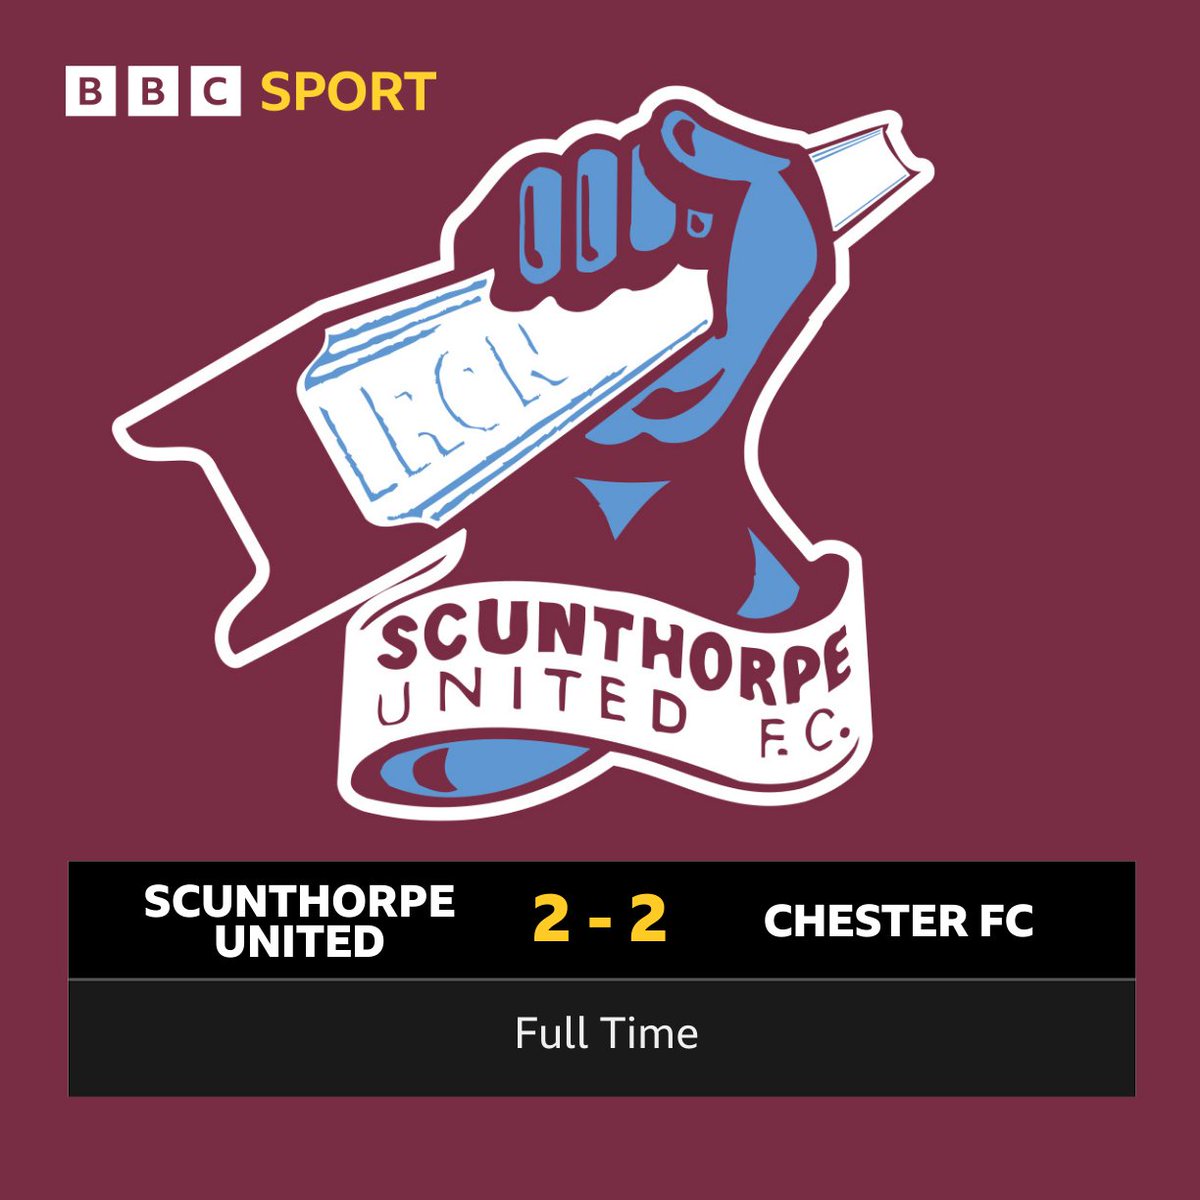 ⚽ FULL TIME ⚽ 🗣 Post-match reaction to follow 📻 Listen to the Football Forum with @mattdeanbbc 🎧 bbc.in/2ucPris ☎ Call 08000 66 59 59 to have your say 📱 Text 81333 (start msg with RH) #Iron | #BBCFootball | @RadioHumberside